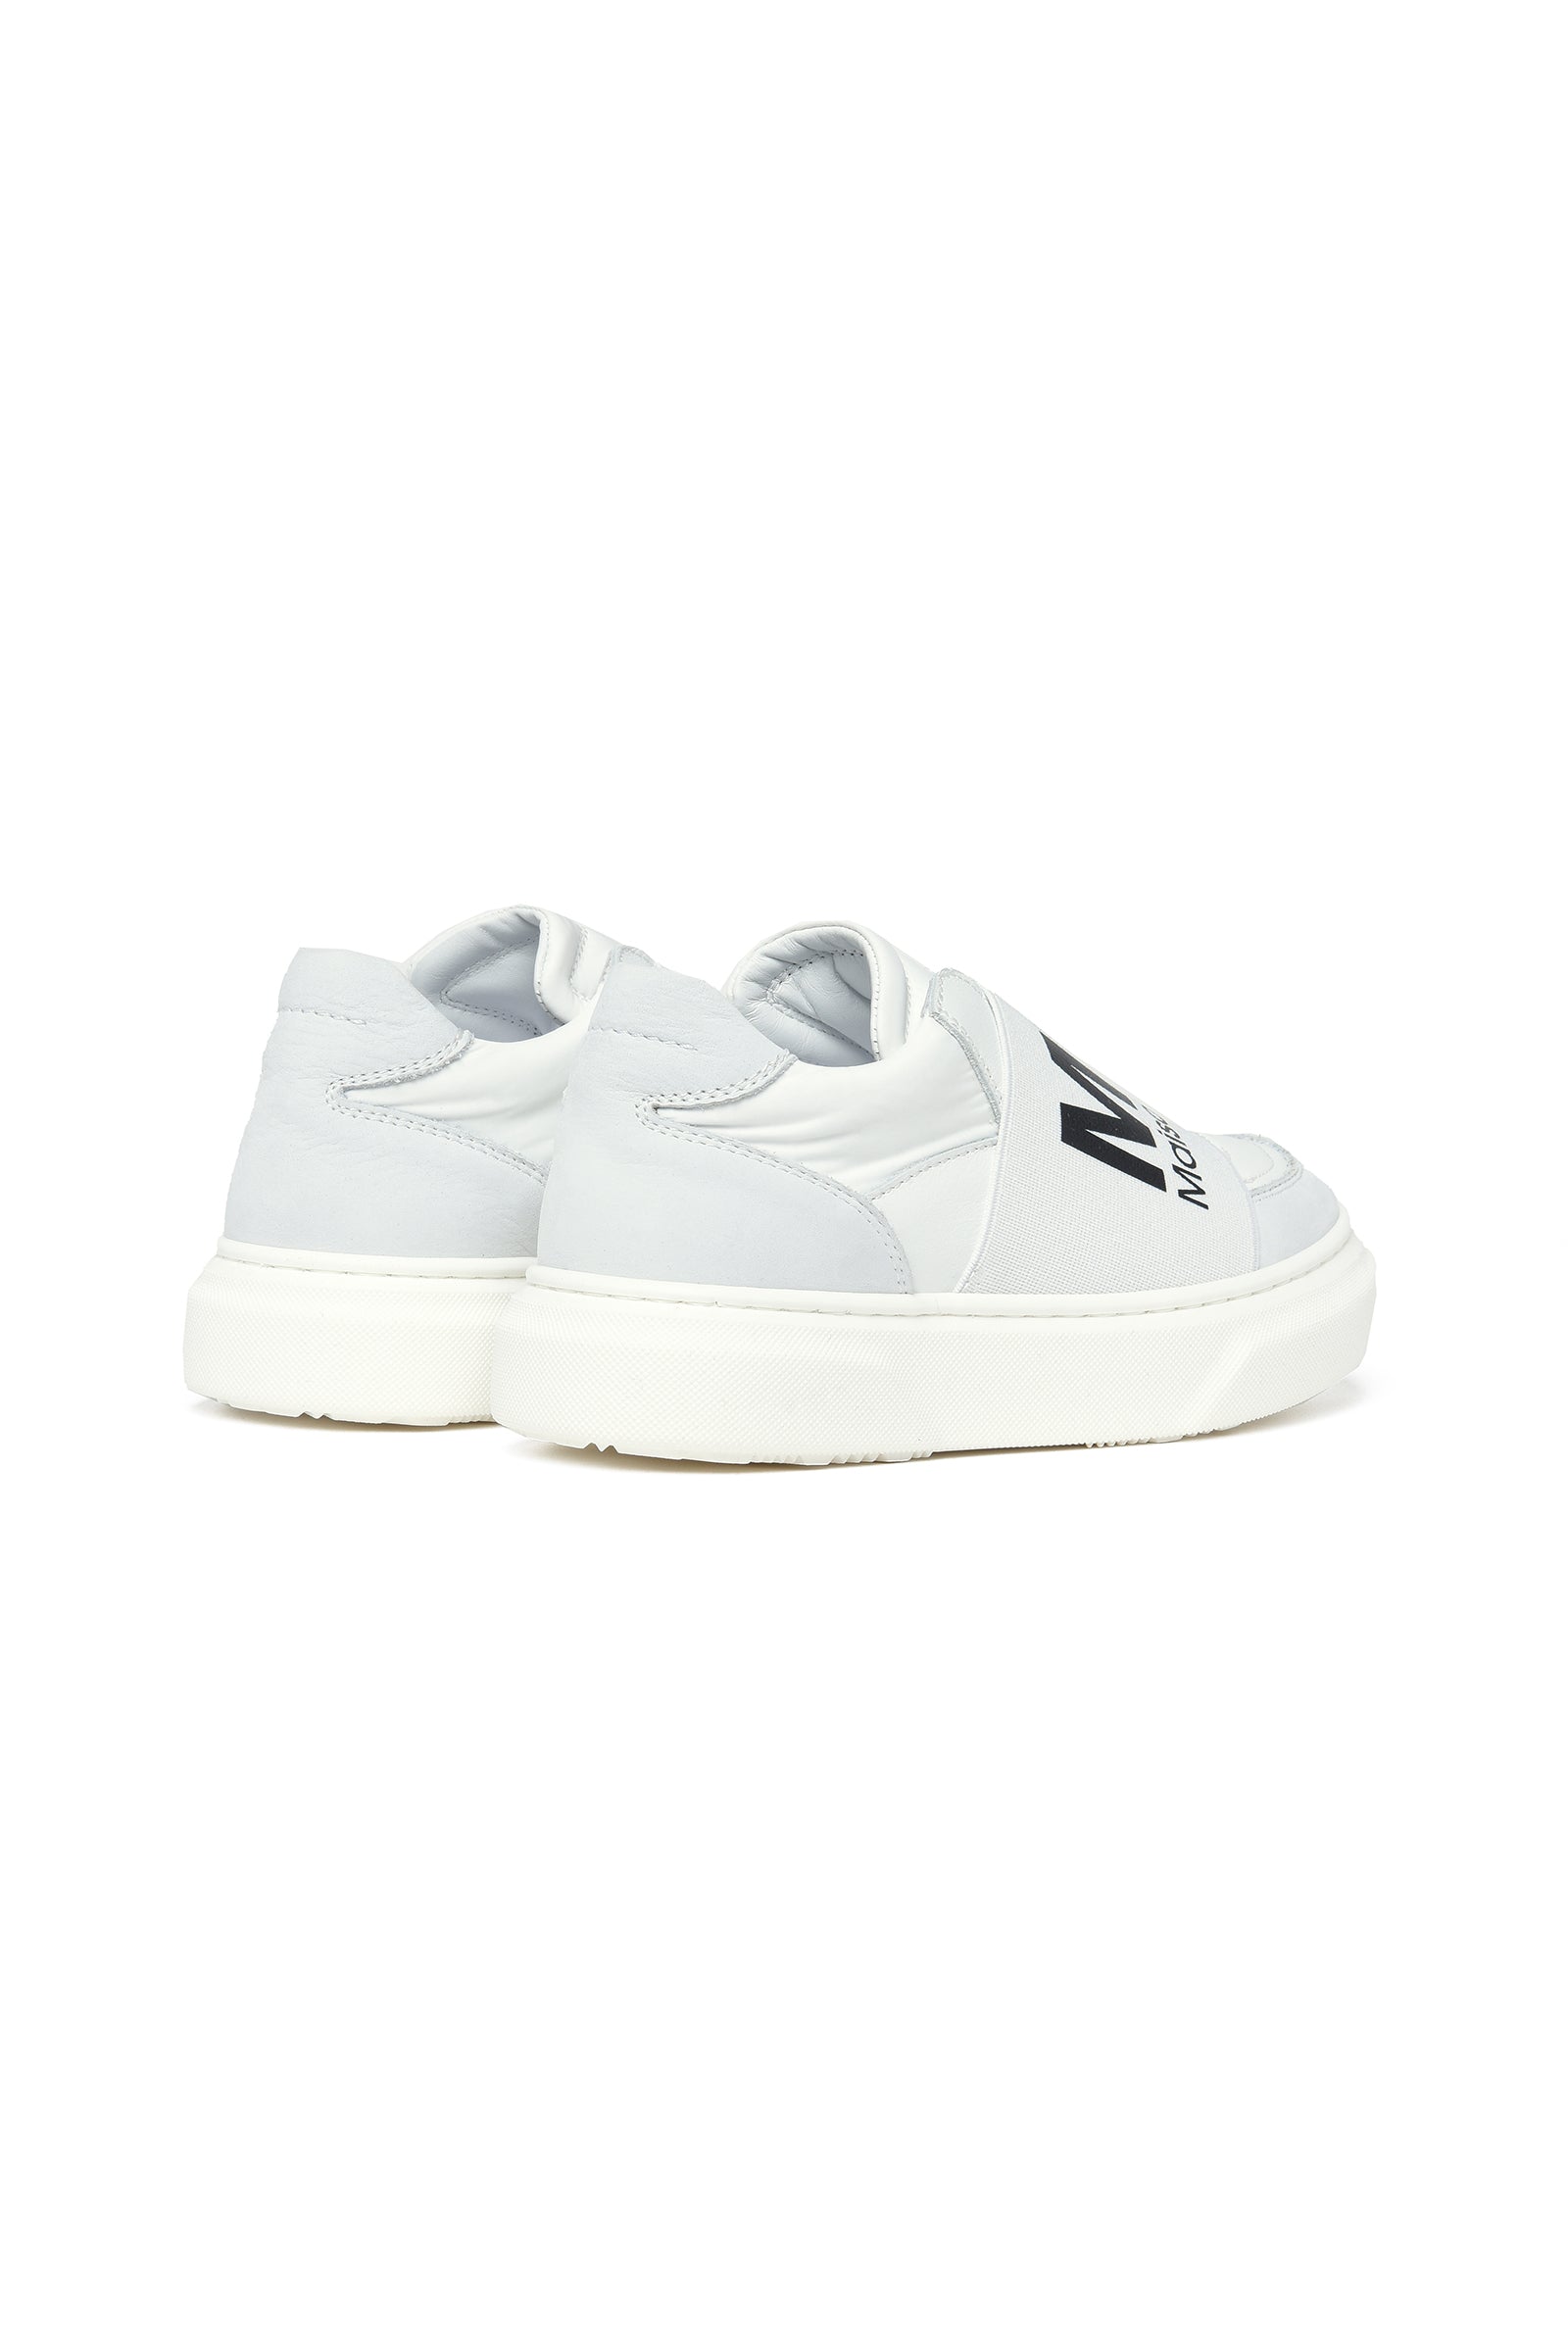 White leather low-top sneakers with elasticized logo band